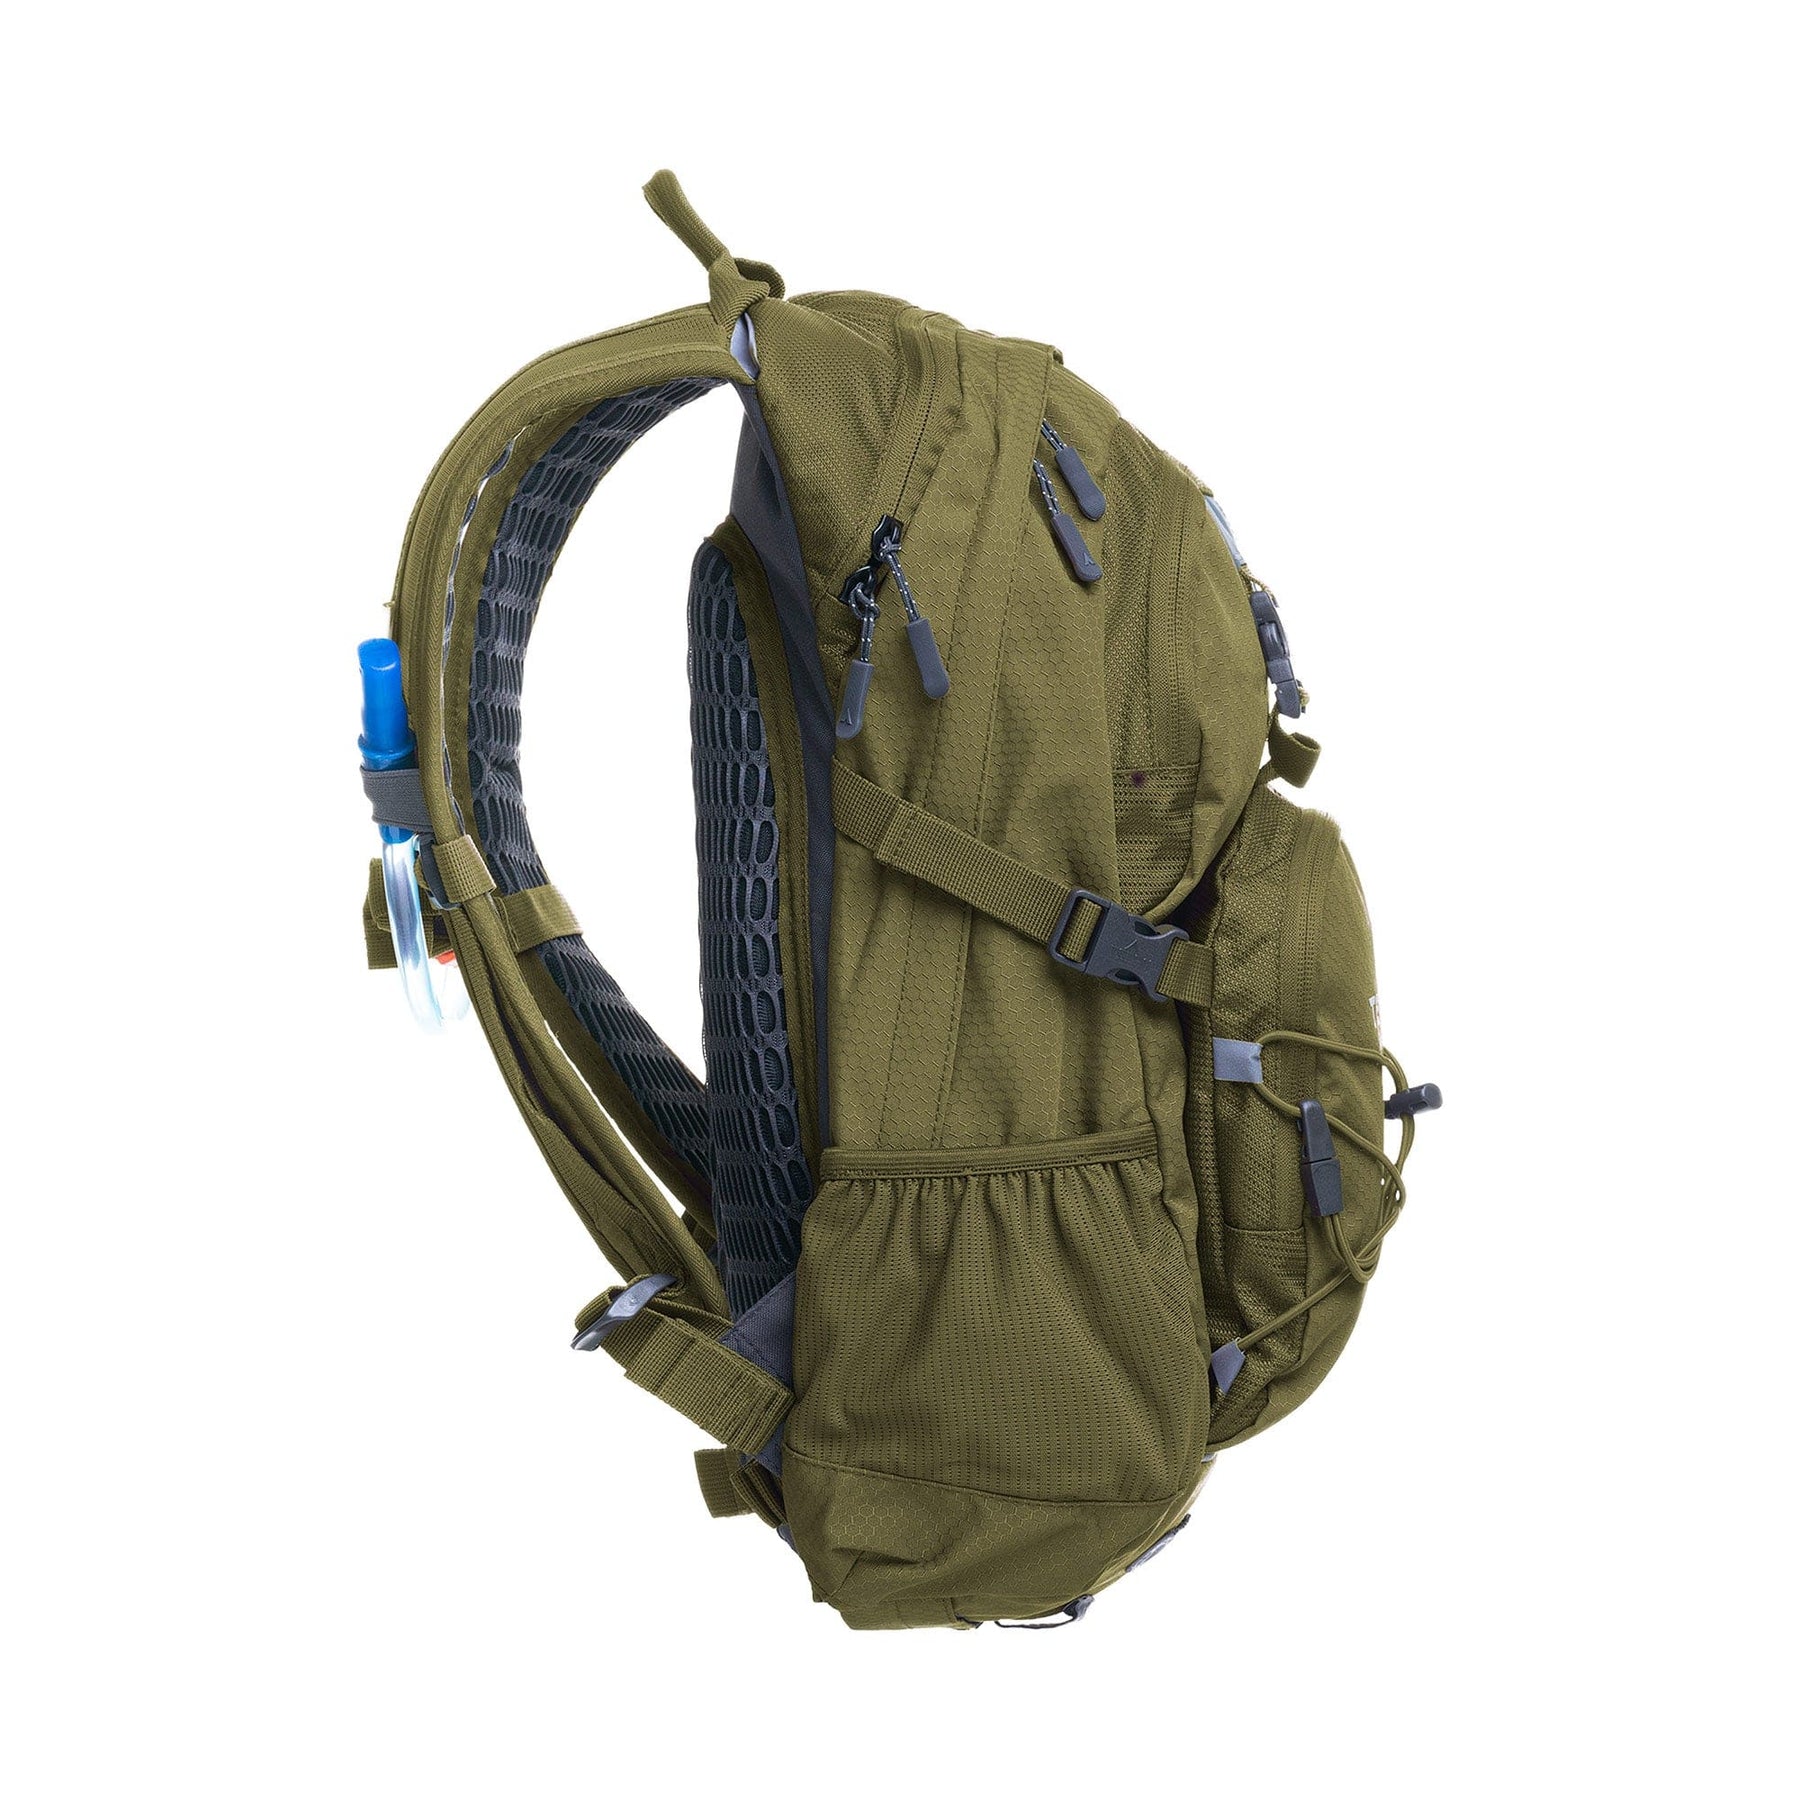 TETON Sports Oasis 18L Hydration Pack with 2L Bladder